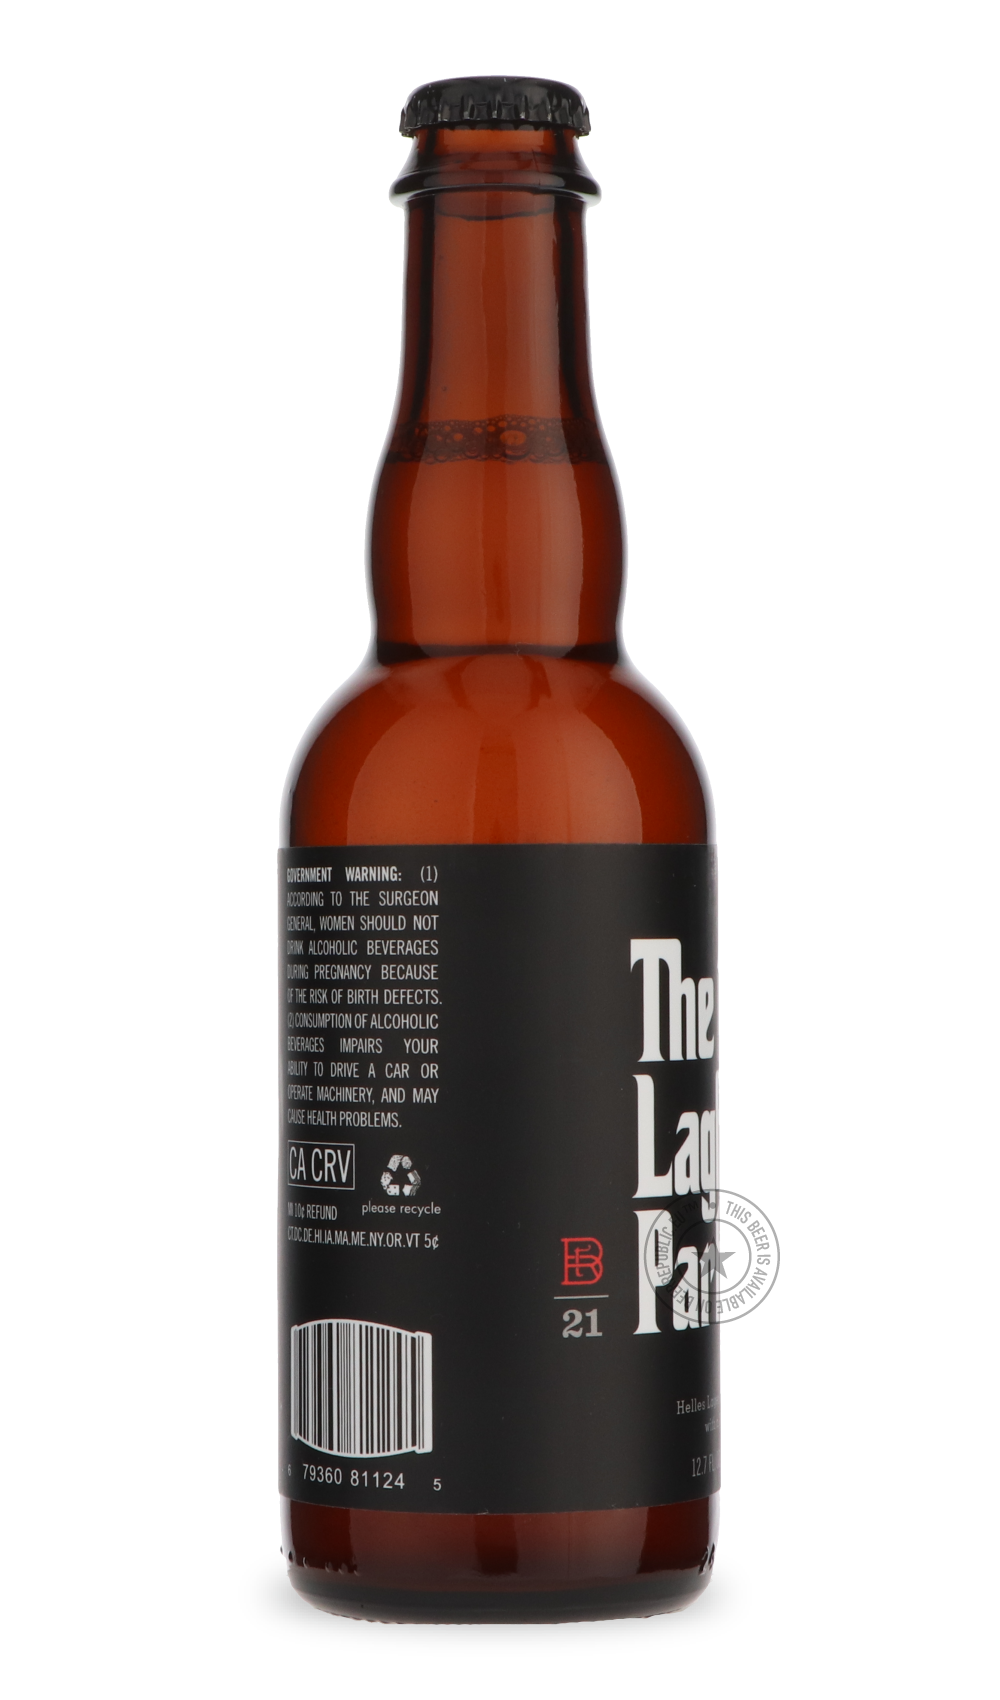 -The Rare Barrel- The Lagfather Part III / Laughing Monk-Sour / Wild & Fruity- Only @ Beer Republic - The best online beer store for American & Canadian craft beer - Buy beer online from the USA and Canada - Bier online kopen - Amerikaans bier kopen - Craft beer store - Craft beer kopen - Amerikanisch bier kaufen - Bier online kaufen - Acheter biere online - IPA - Stout - Porter - New England IPA - Hazy IPA - Imperial Stout - Barrel Aged - Barrel Aged Imperial Stout - Brown - Dark beer - Blond - Blonde - Pi